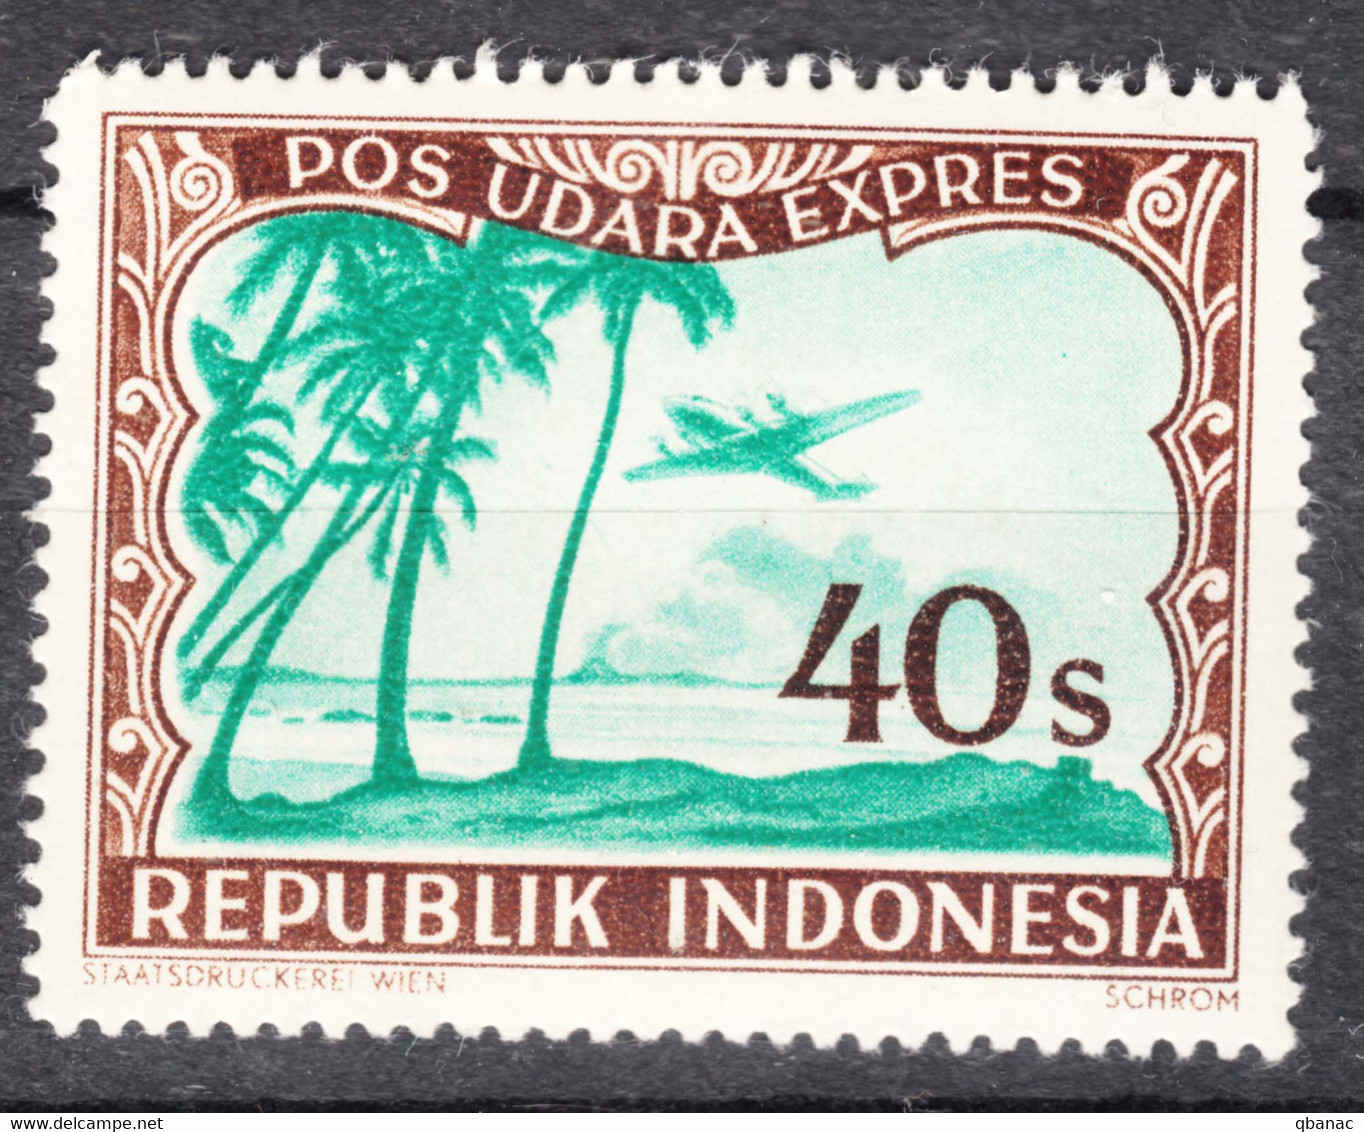 Indonesia Joint Issue 1948 Airmail Express Mi#90 Mint Never Hinged - Indonesië